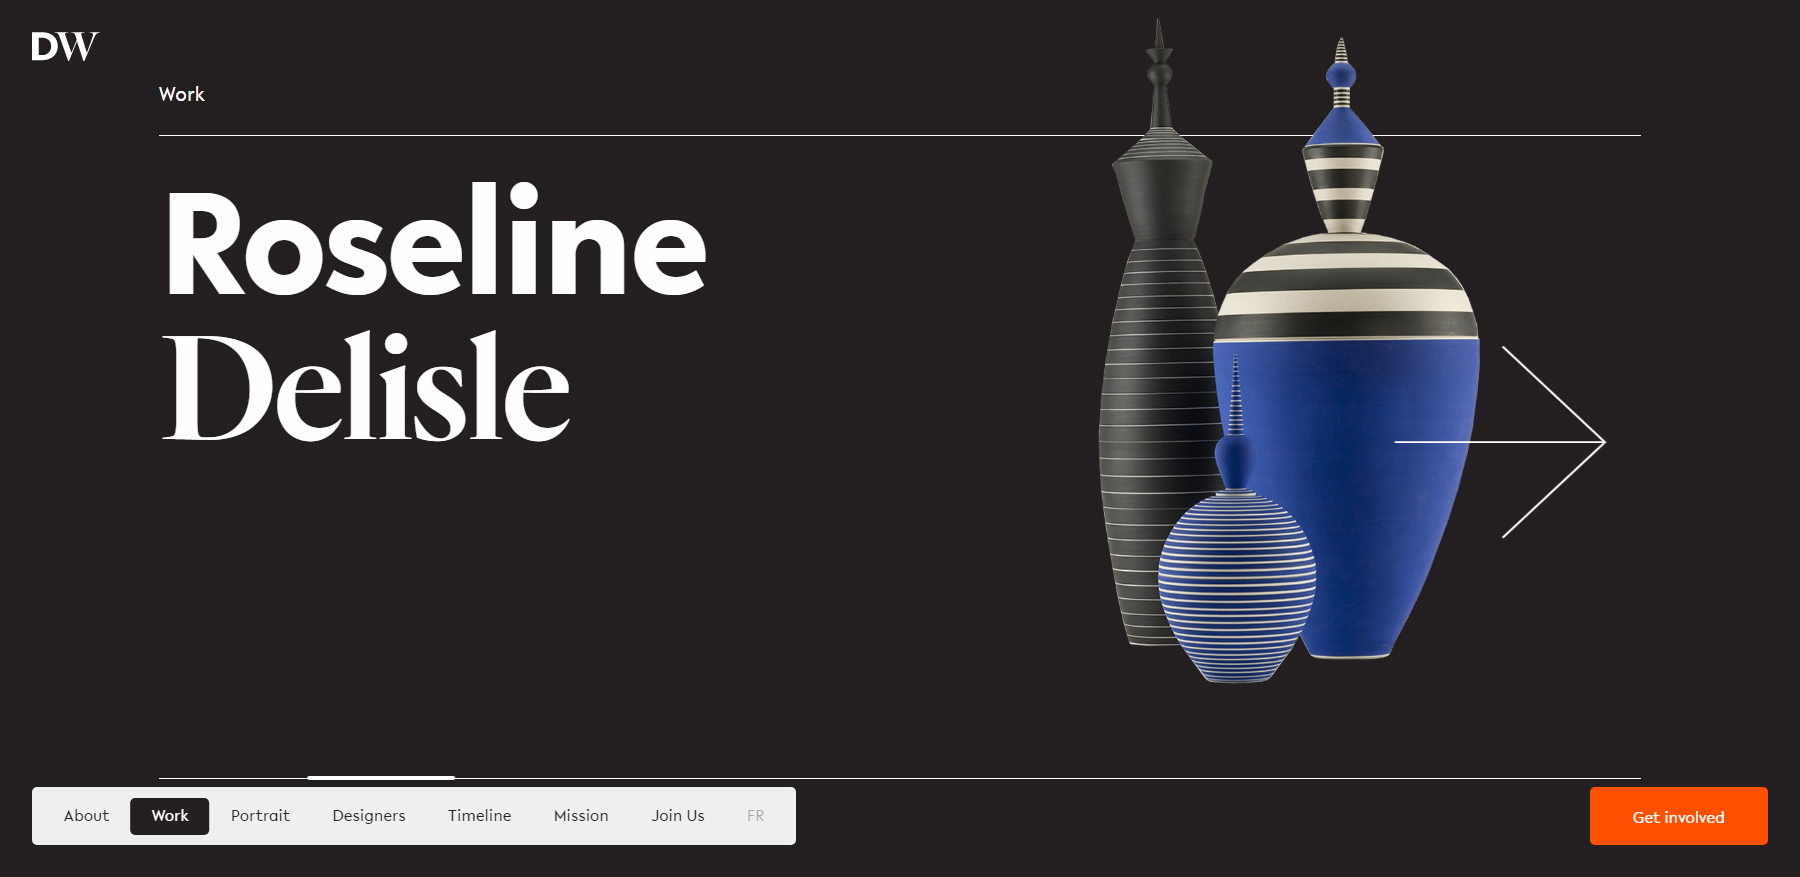 Designed by Women	 - Website of the Day